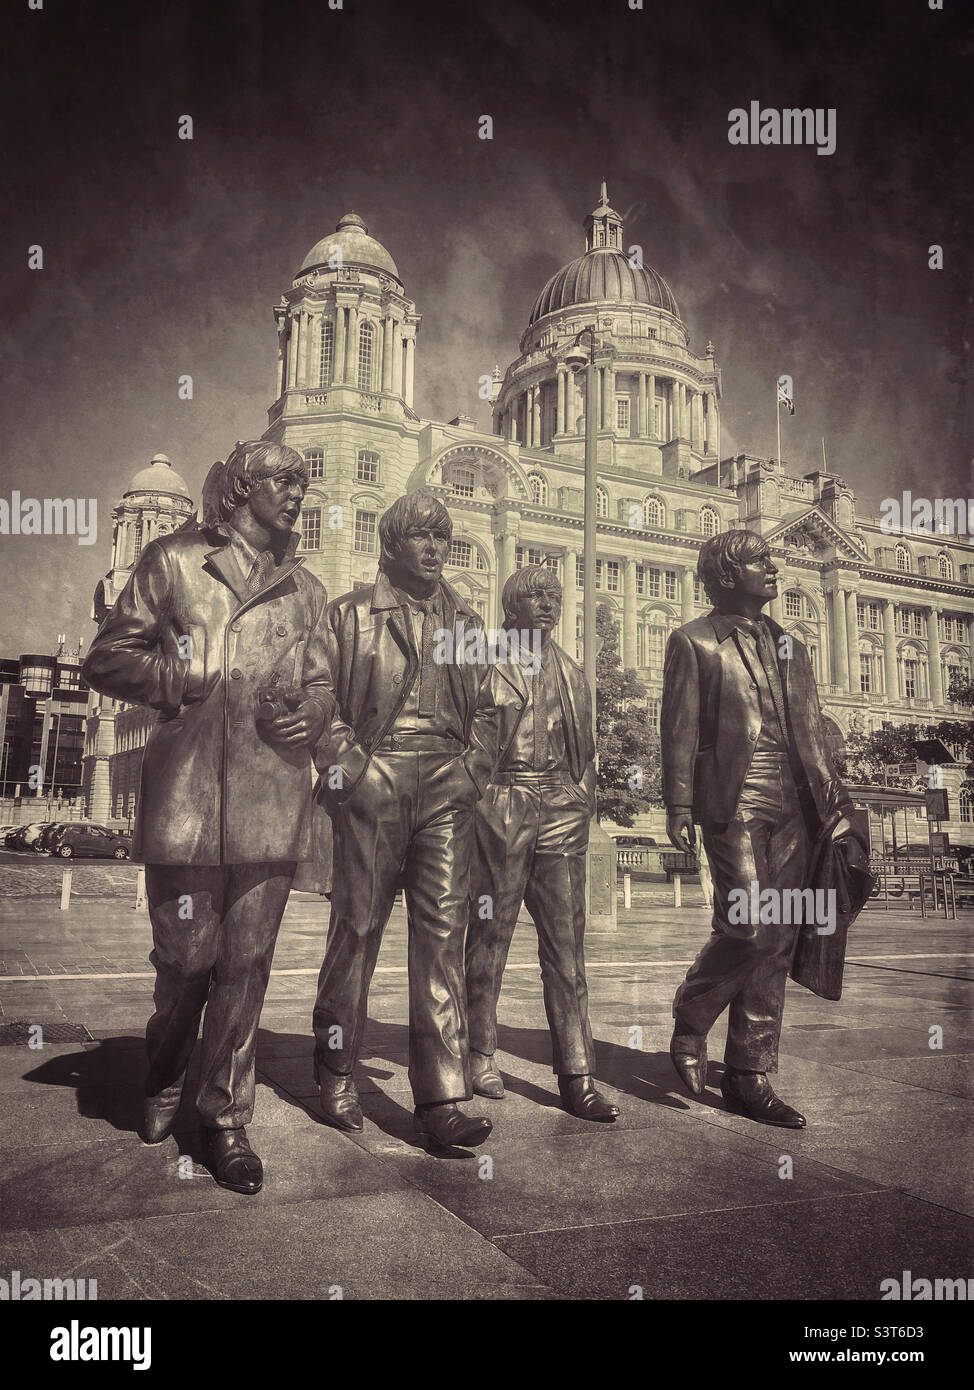 The world famous and iconic Fab Four - a bronze statue sculpture of The Beetles - McCartney, Star, Harrison & Lennon. Situated at the Pier Head in Liverpool, England. Photo ©️ COLIN HOSKINS. Stock Photo